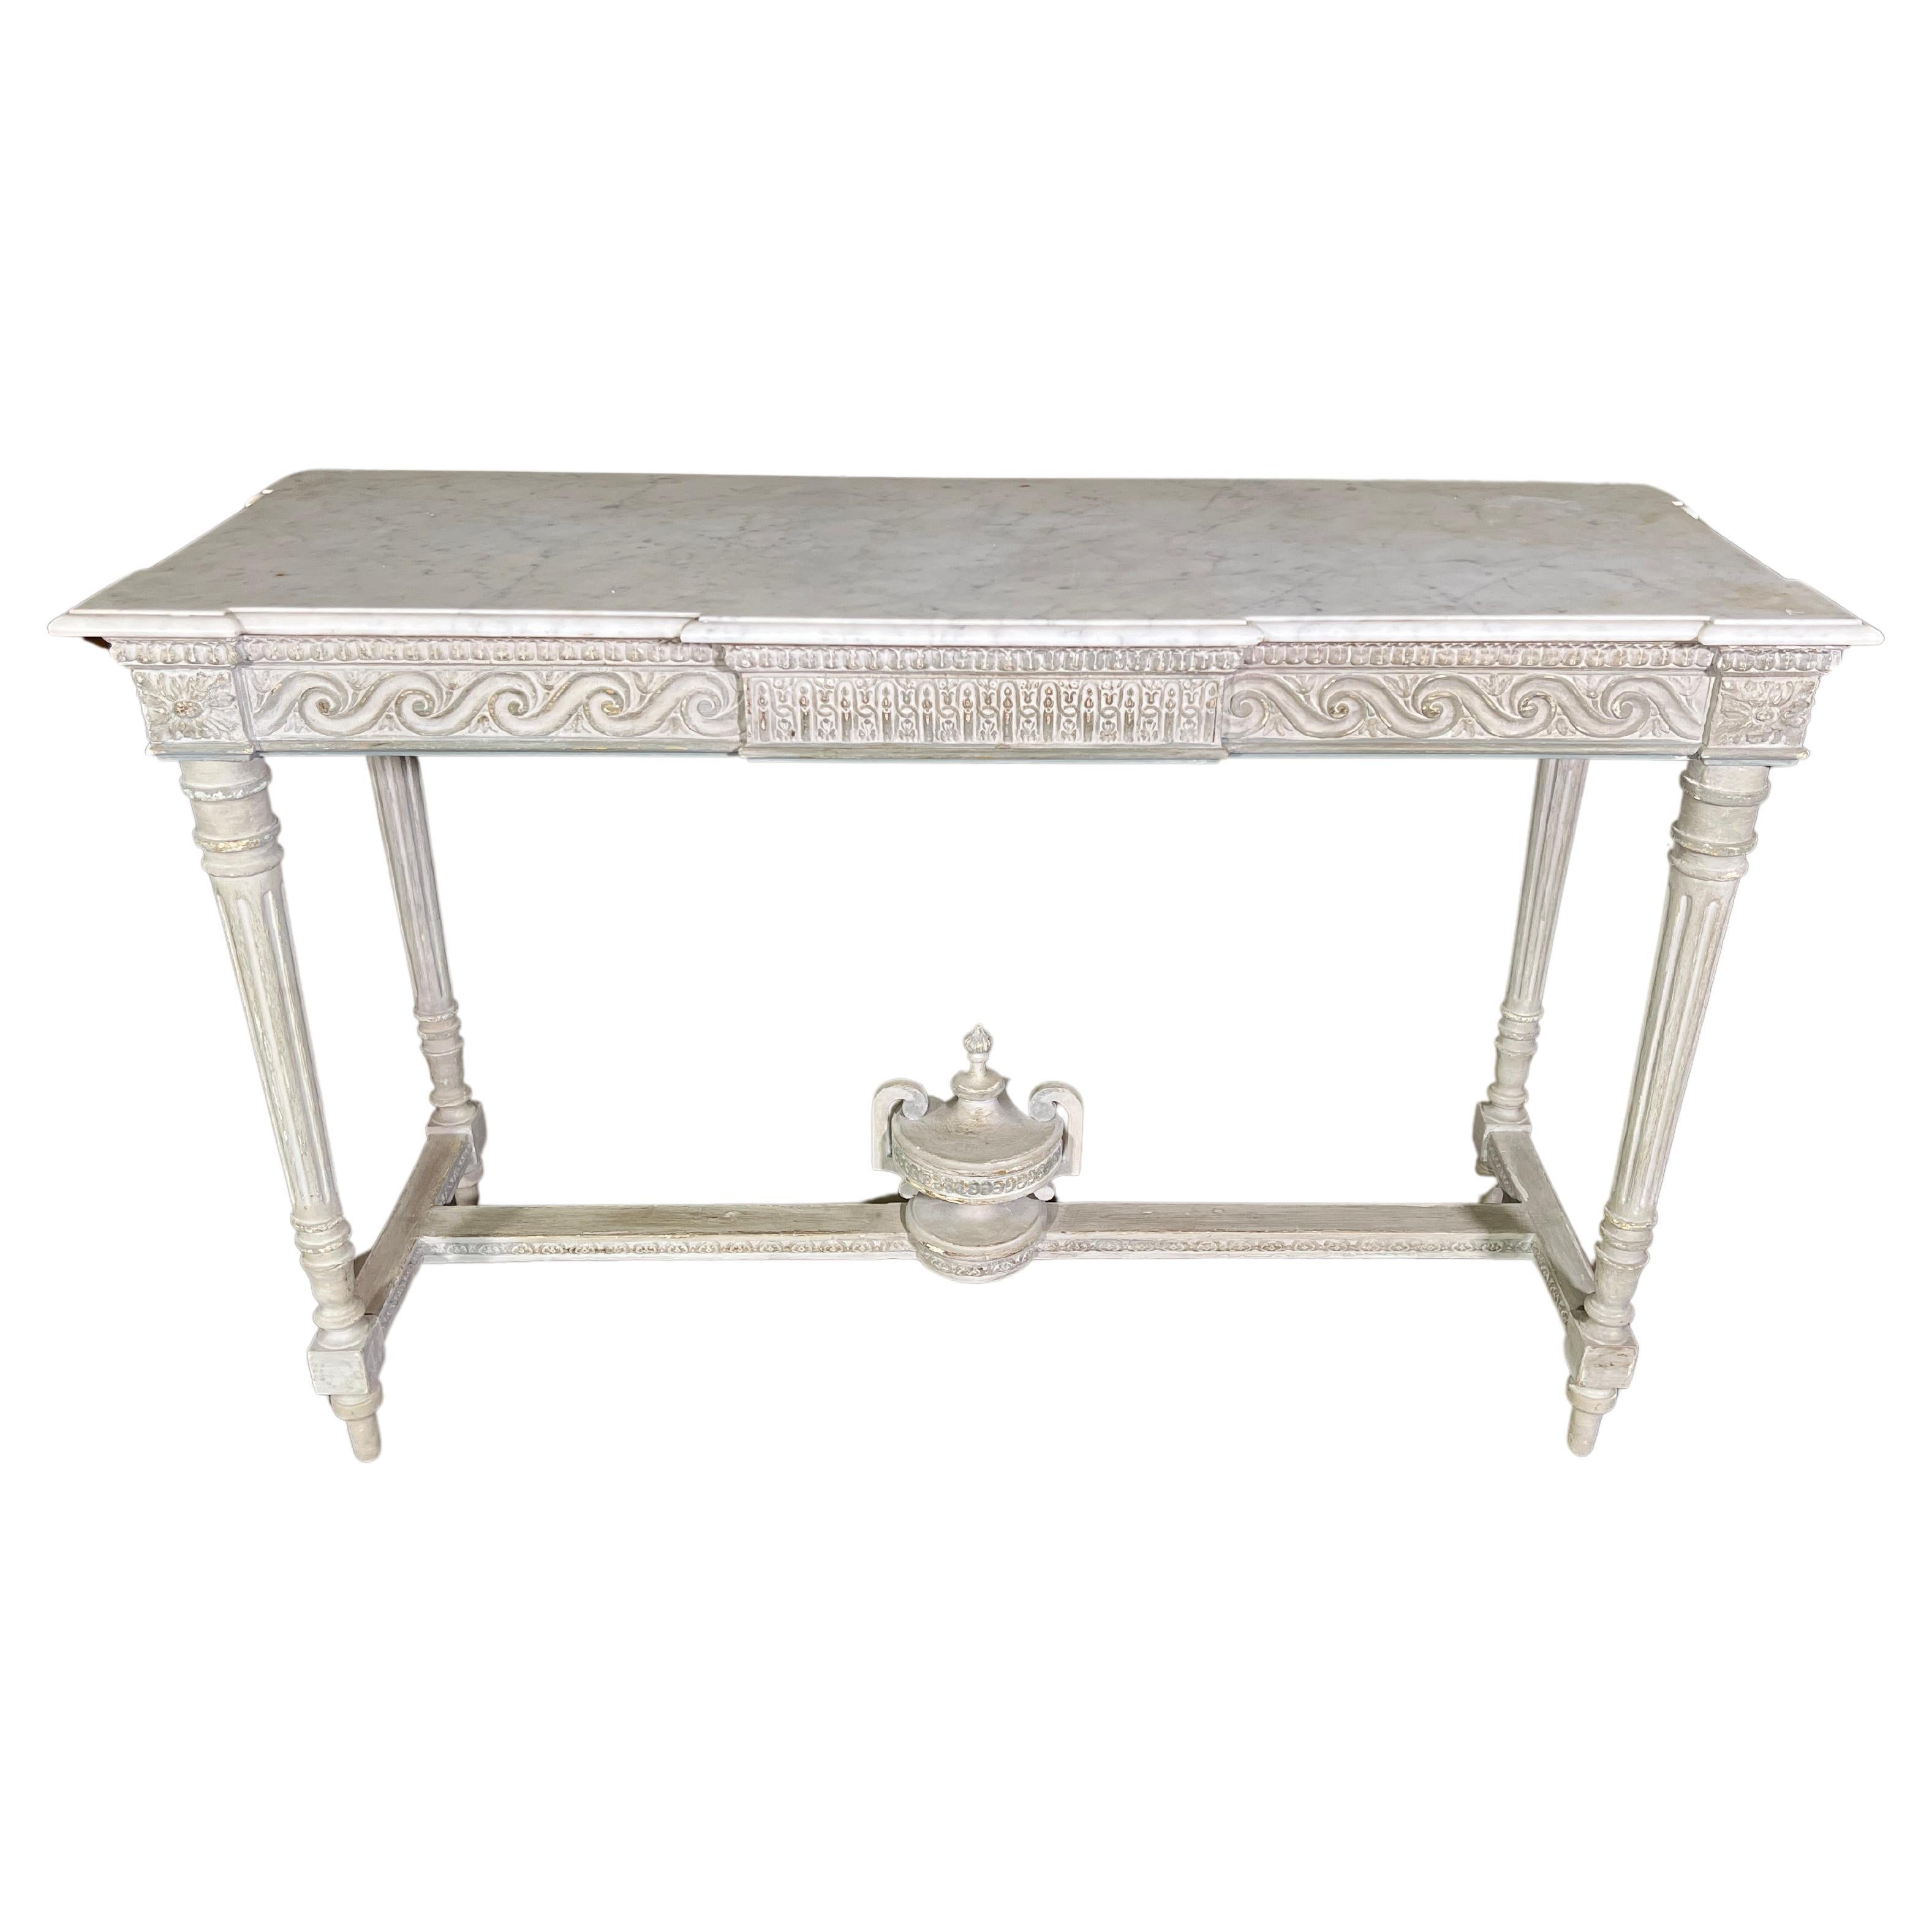 Circa 1830 Louis XVI Style Painted Console For Sale